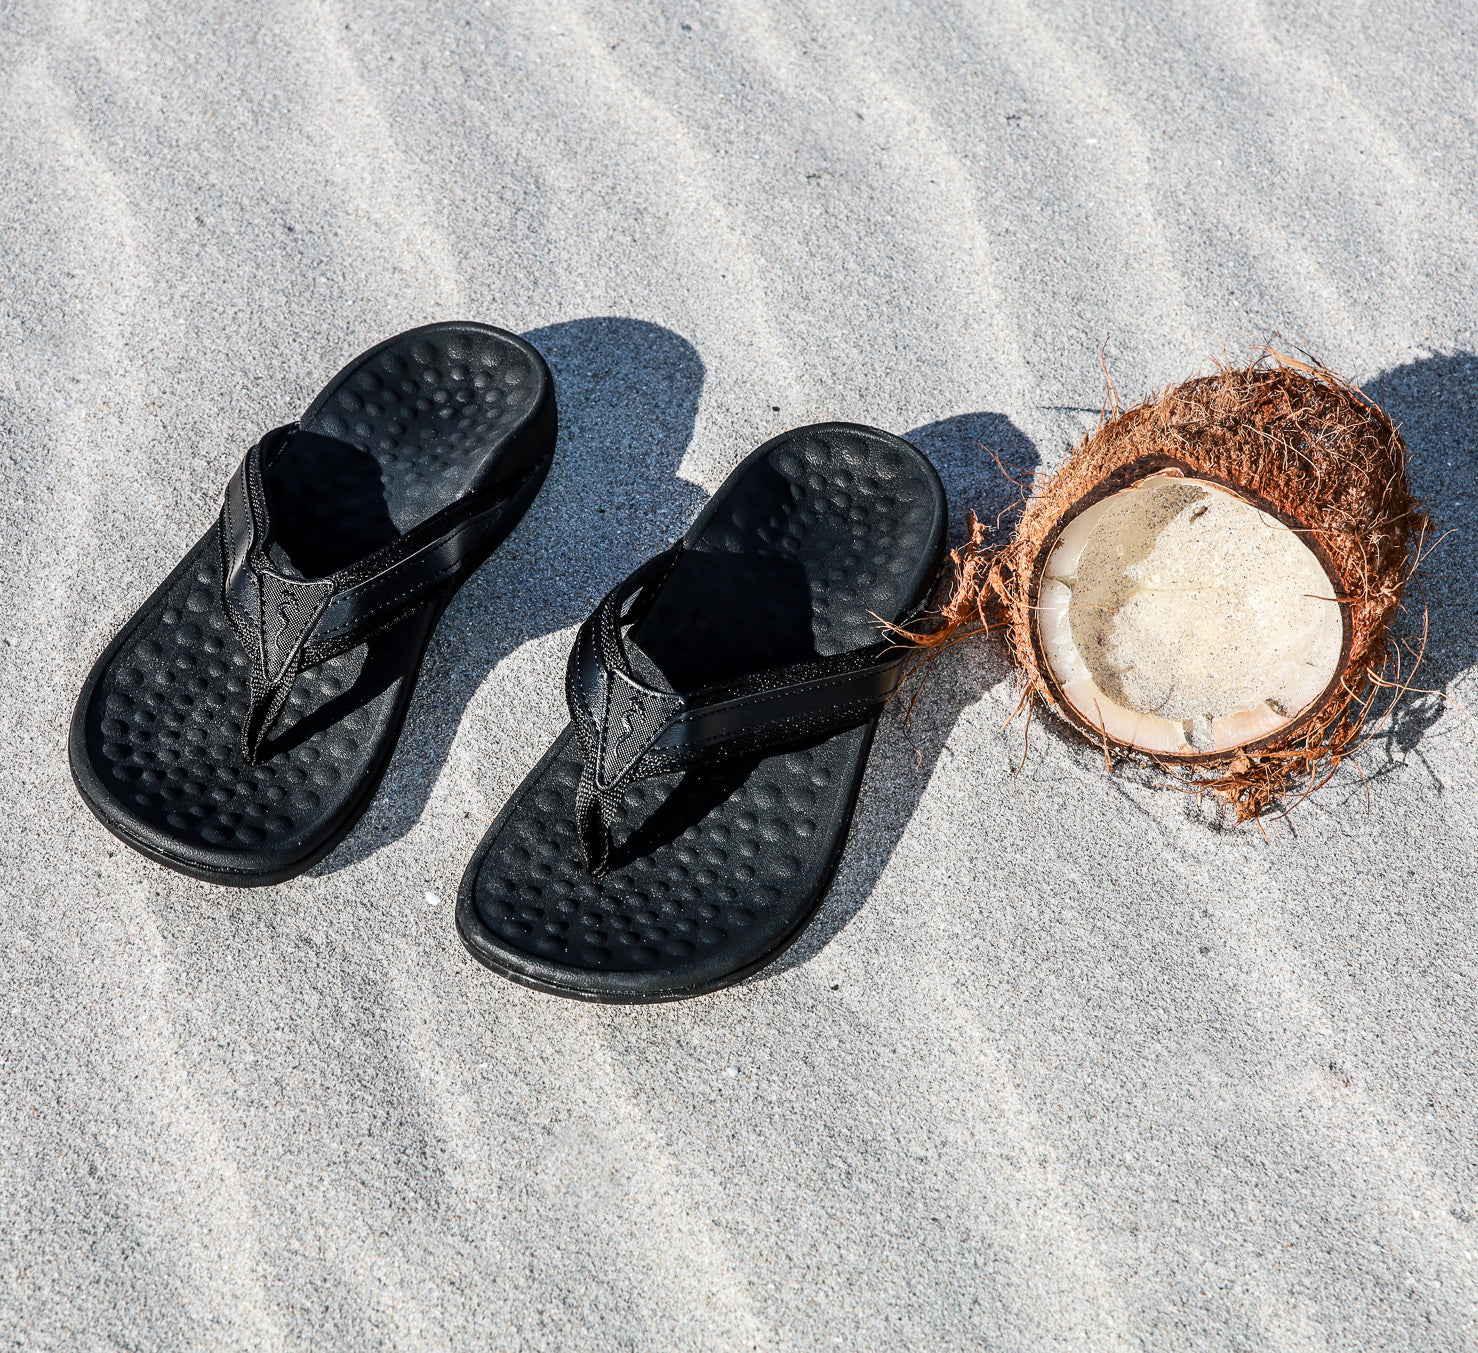  Arch Support Flip-Flops for Men and Women 